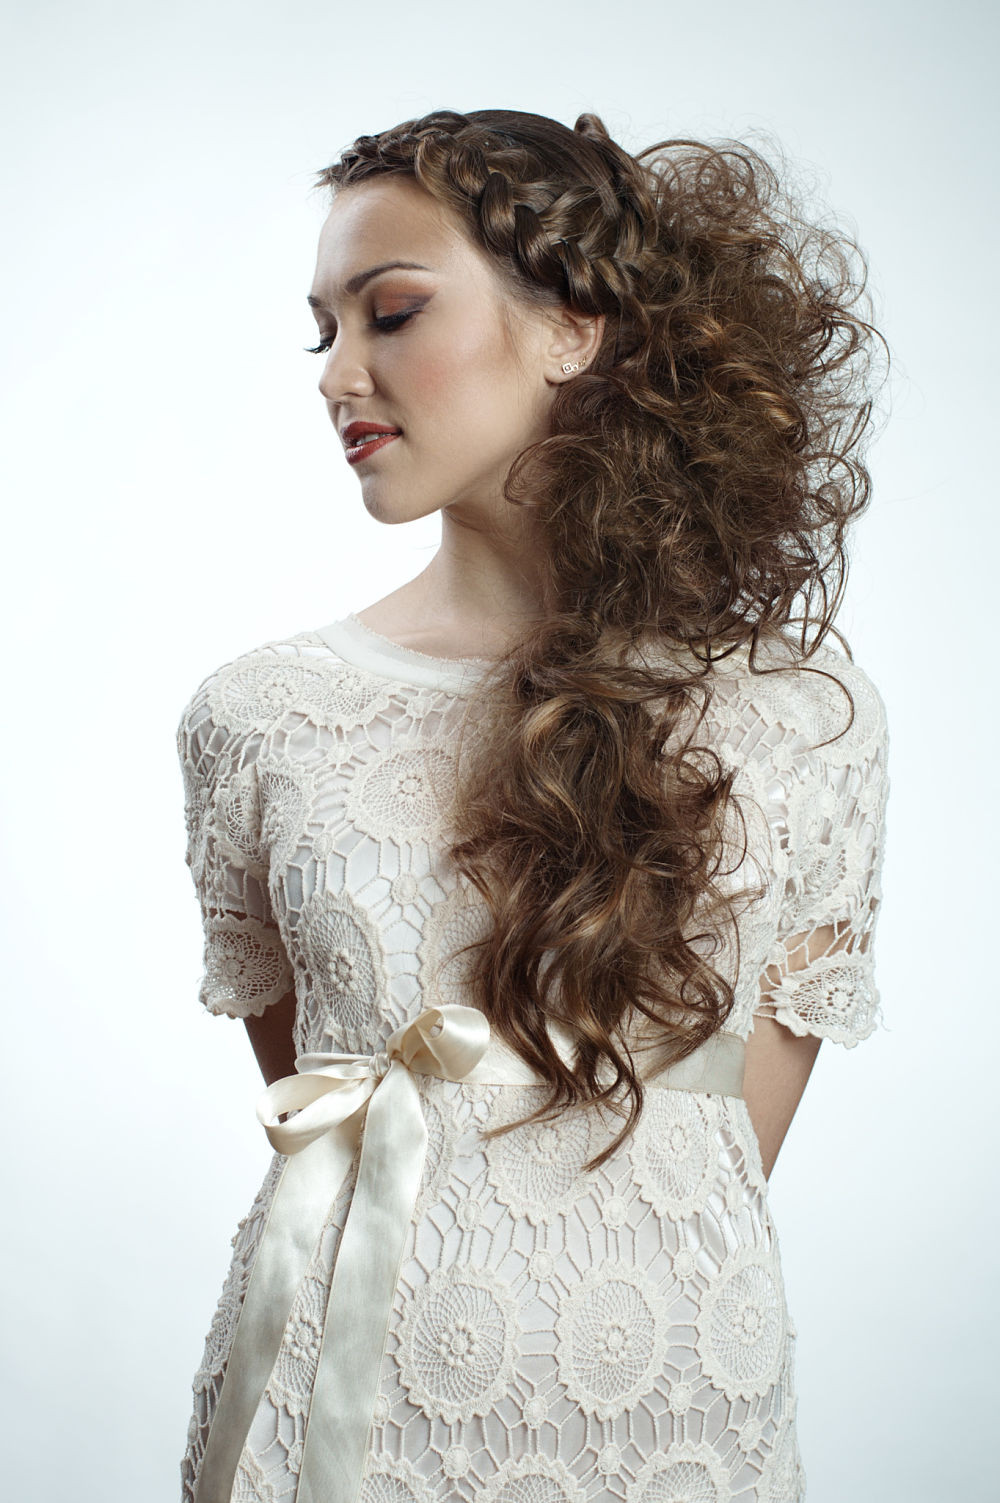 Prom Dress Hairstyles
 Let’s Turn Some Heads DIY Prom Hairstyle ´Dos For Curly